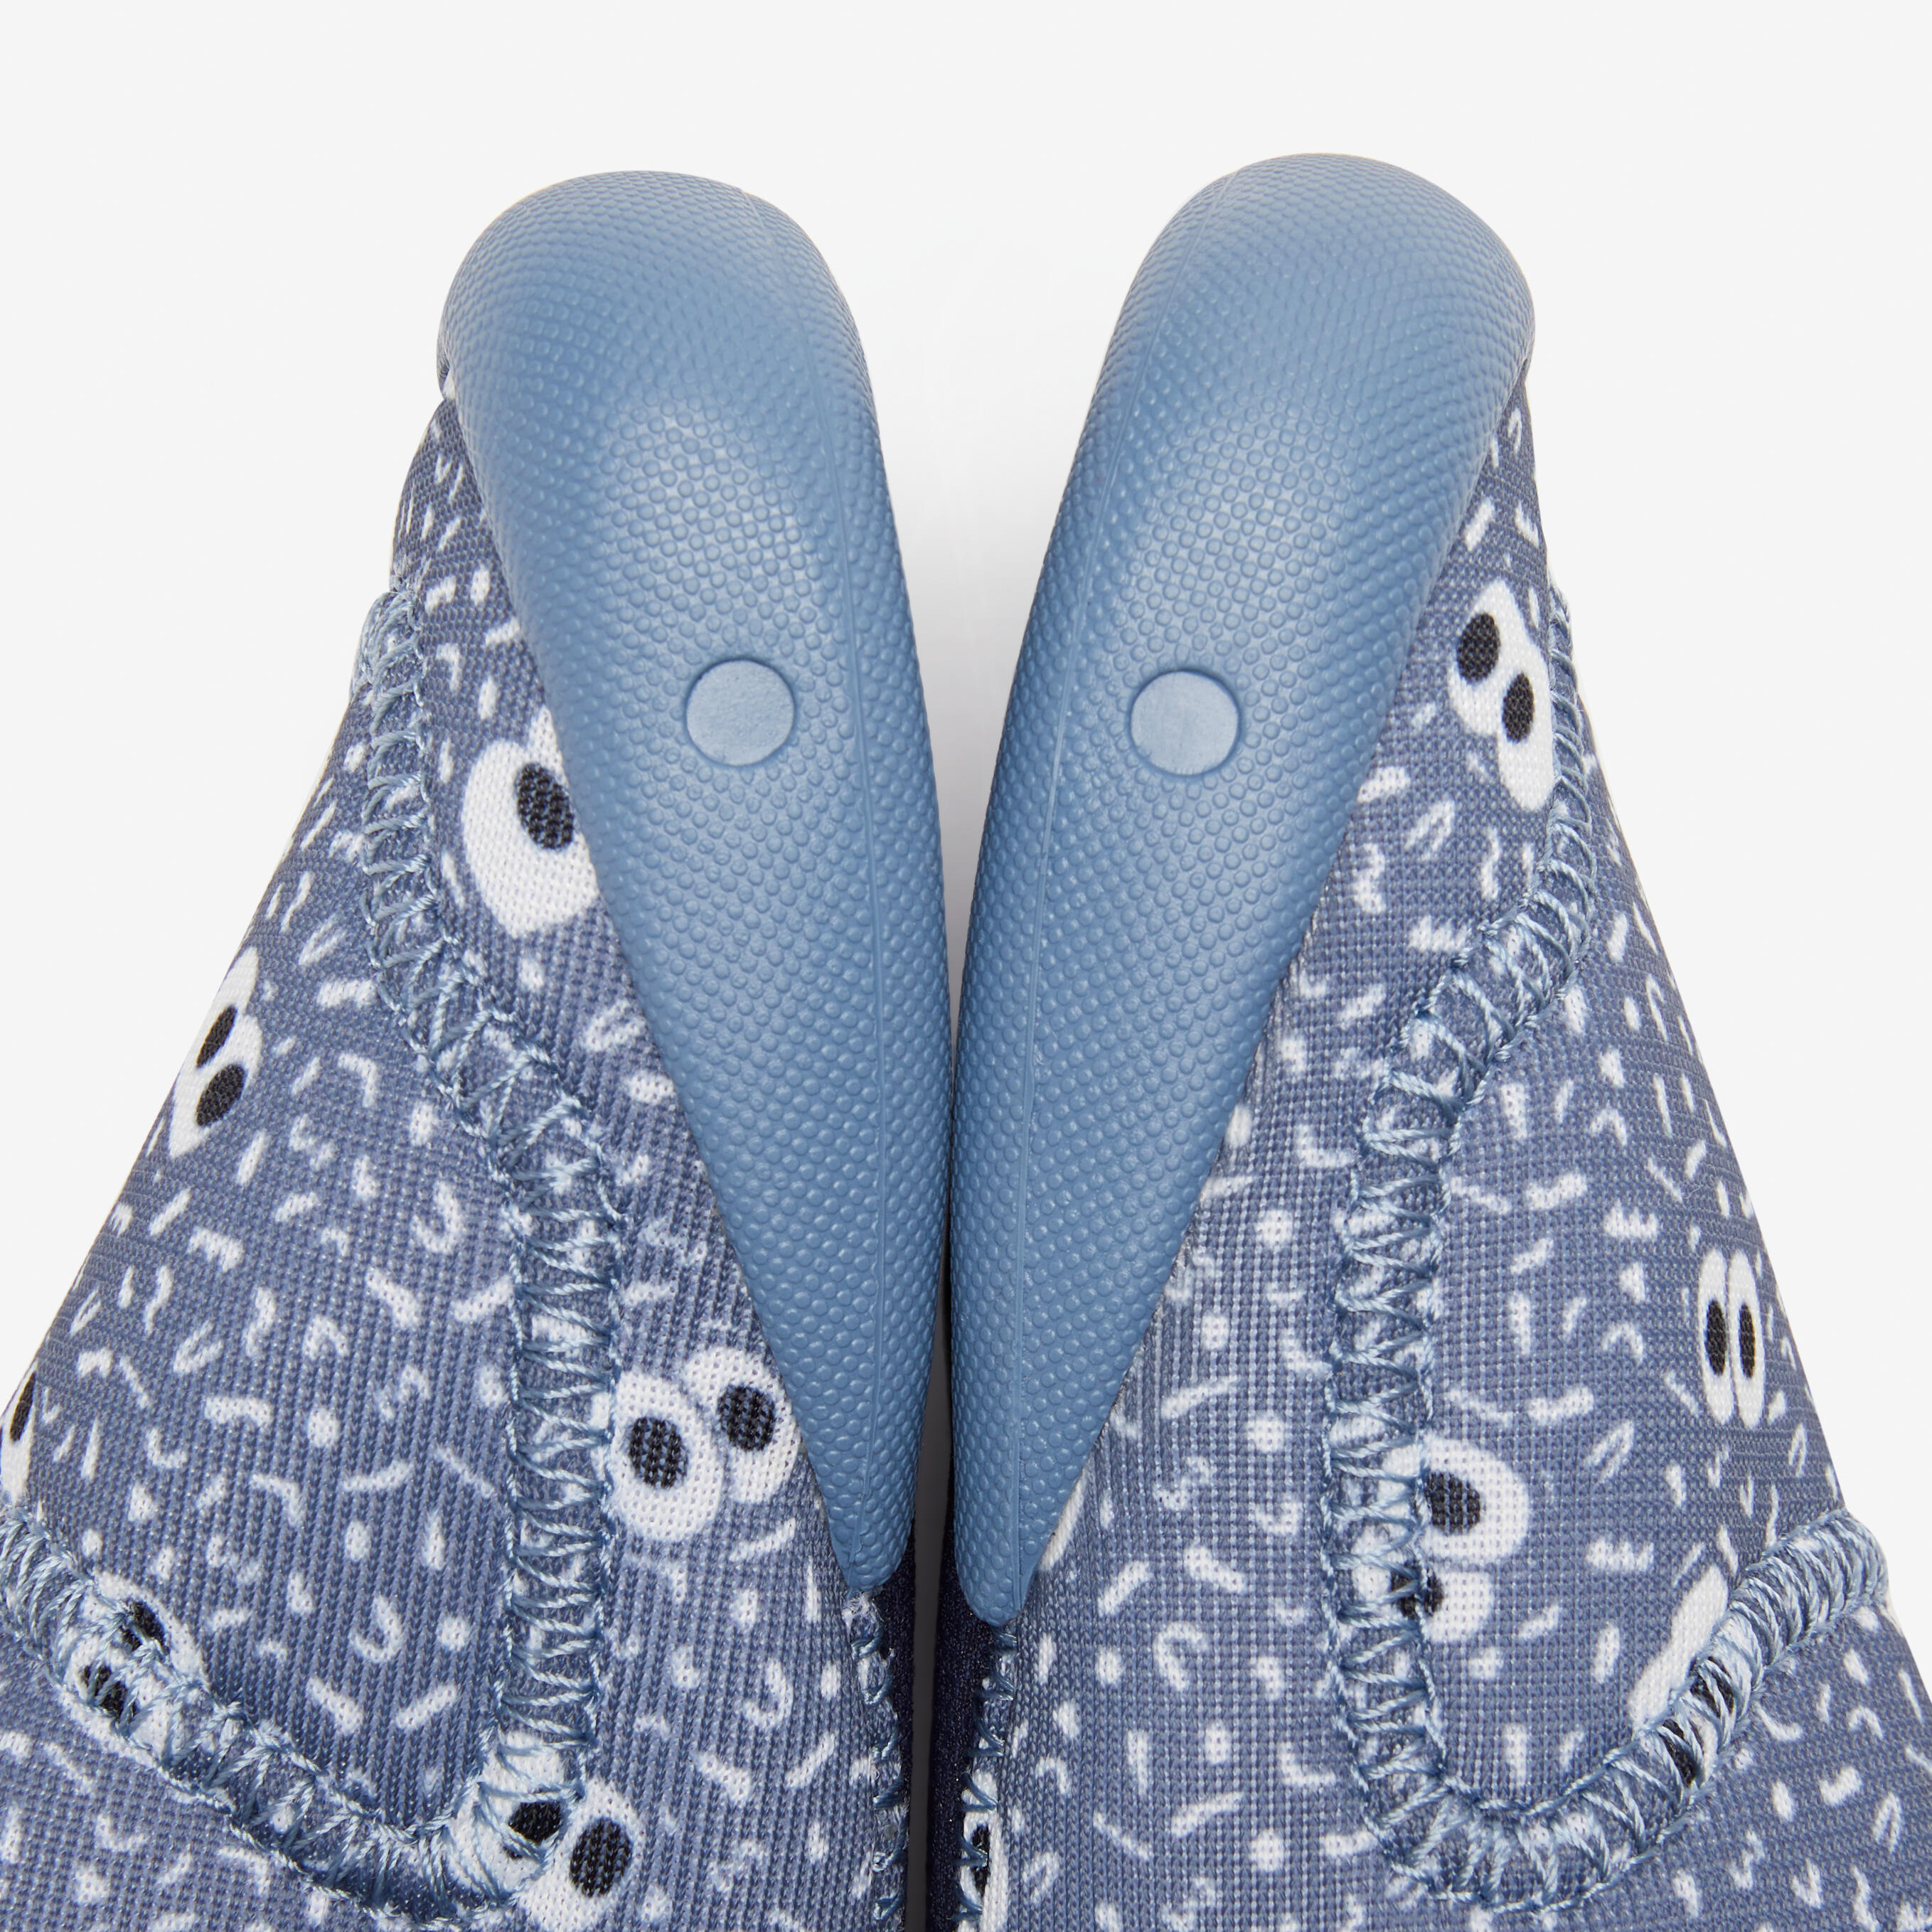 Kids' Non-Slip and Breathable Bootee - Patterns 7/8